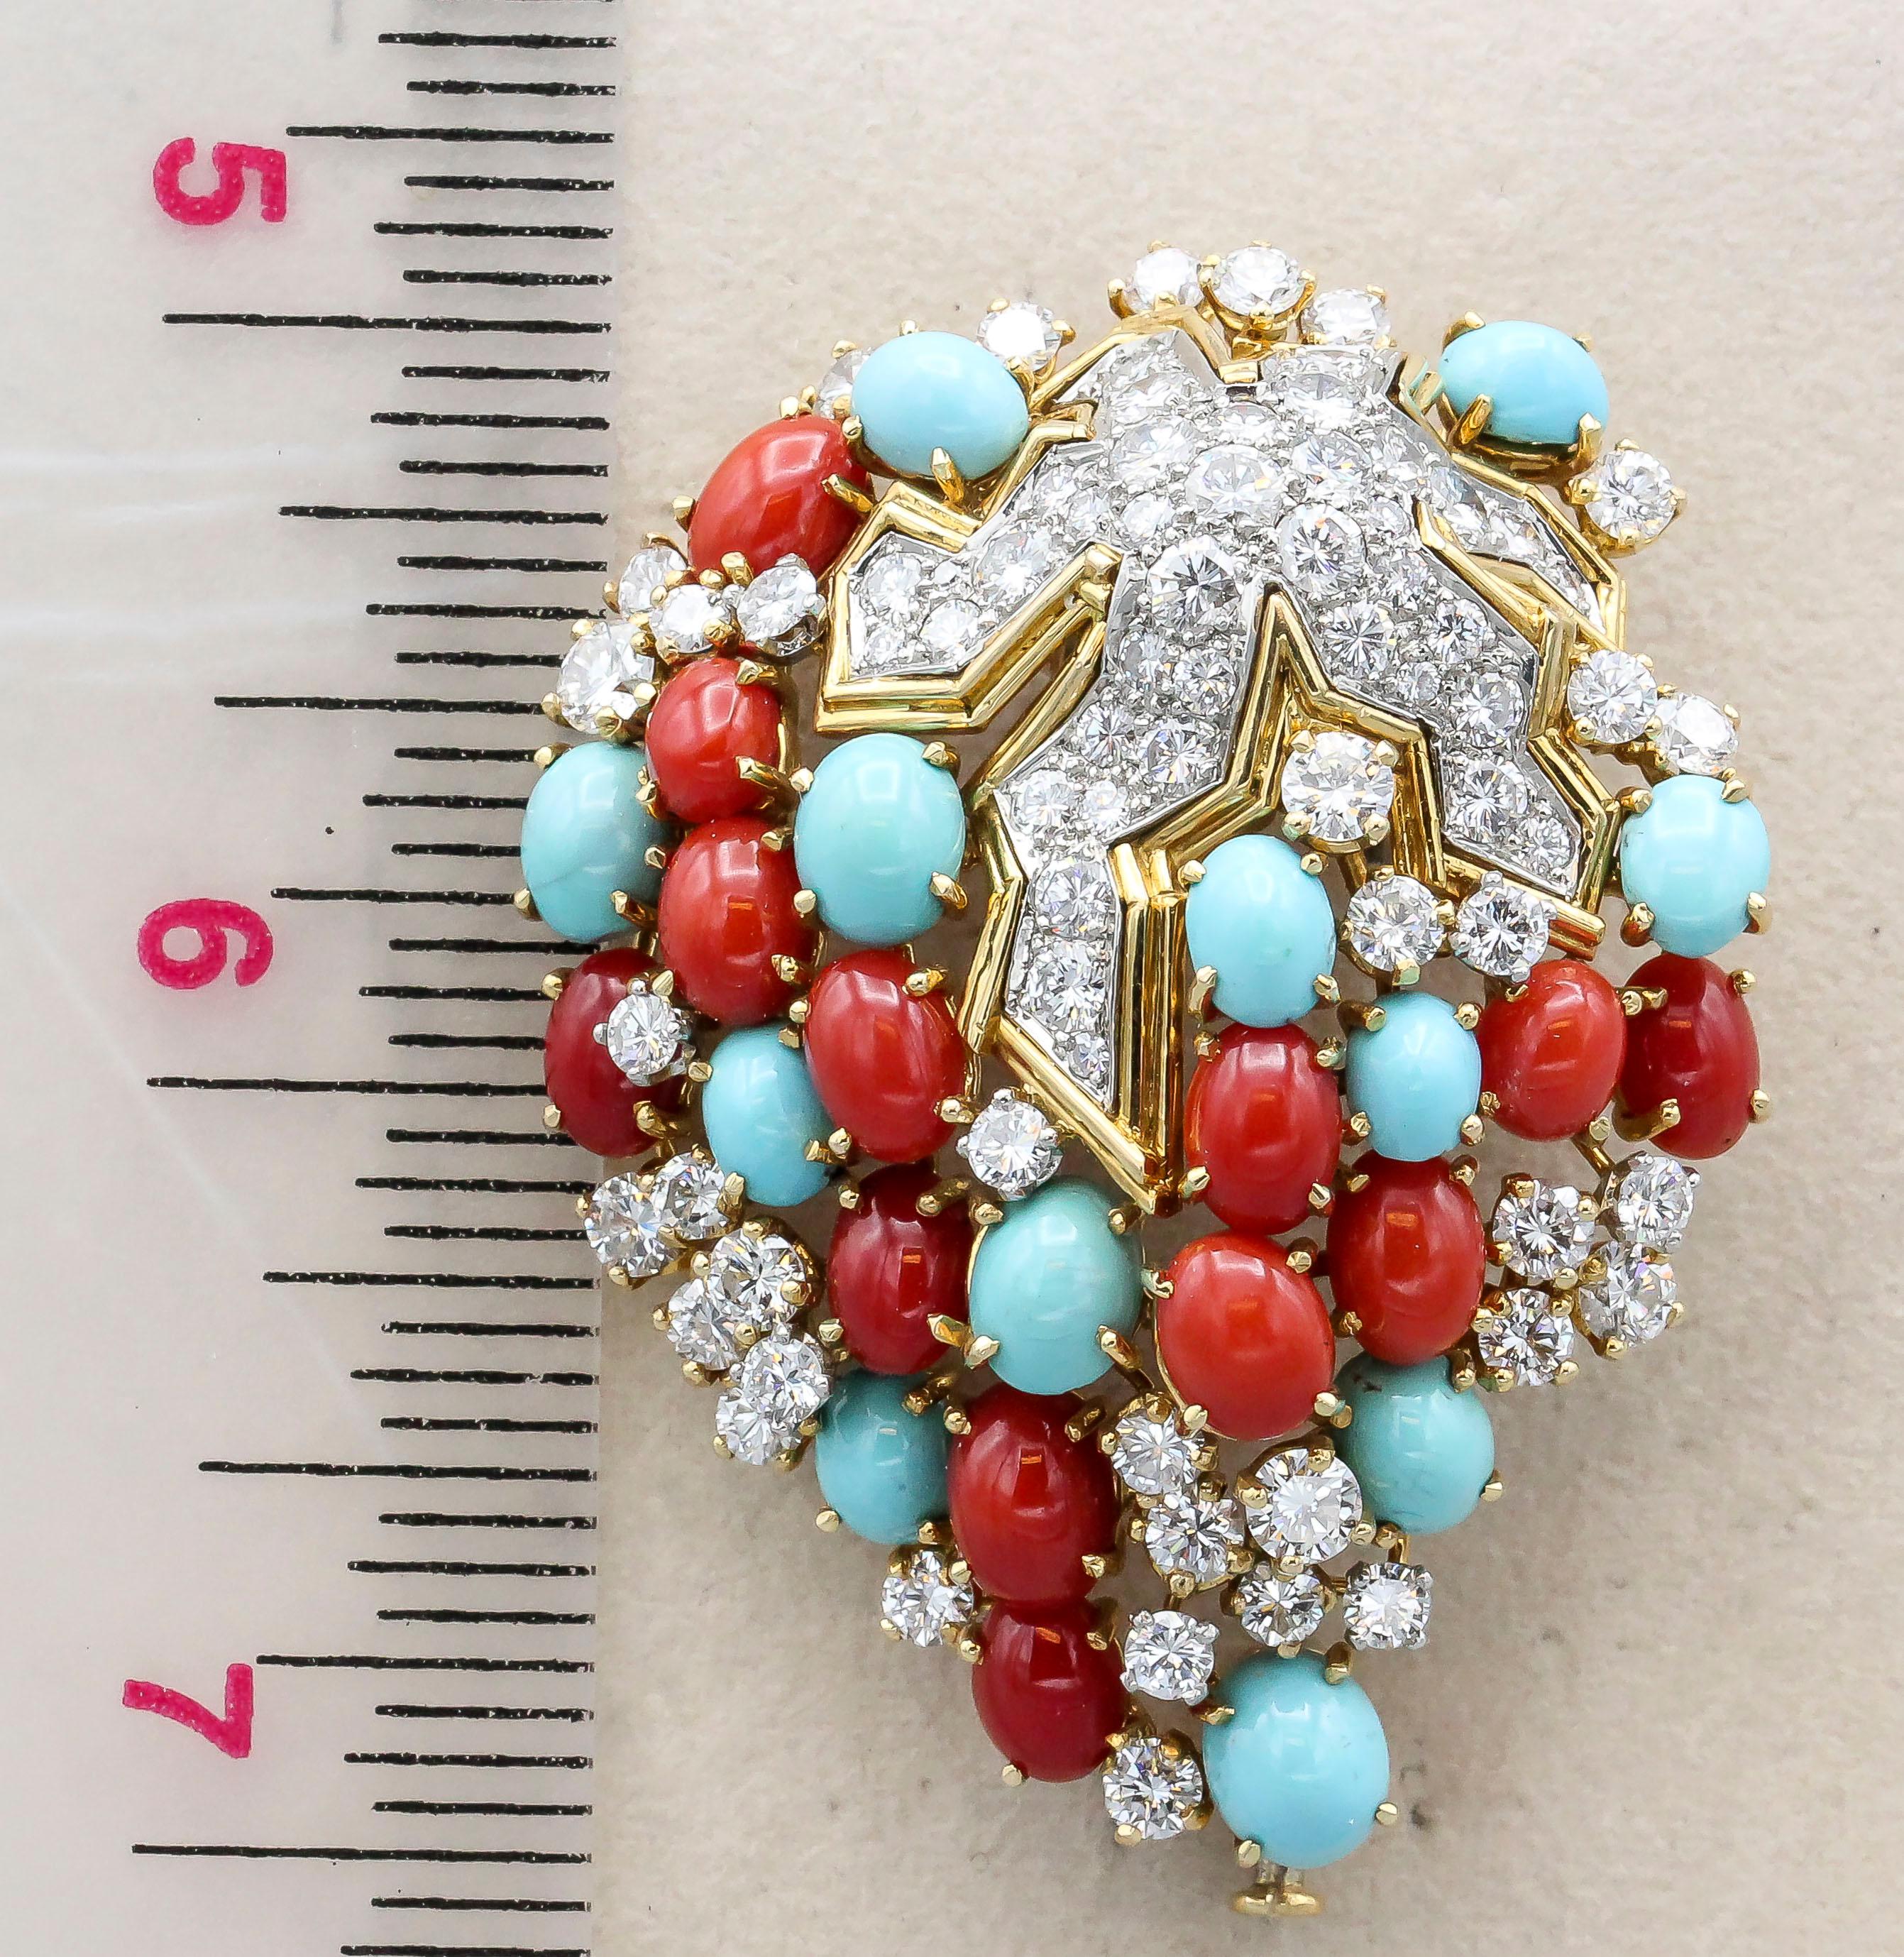 Very fine and rare brooch by Tiffany & Co. Schlumberger.  Made in 18k yellow gold and platinum, with an array of cabochon turquoises, corals, and diamonds set throughout. Featuring approx. 6 carats of high grade white diamonds.  A more abstract